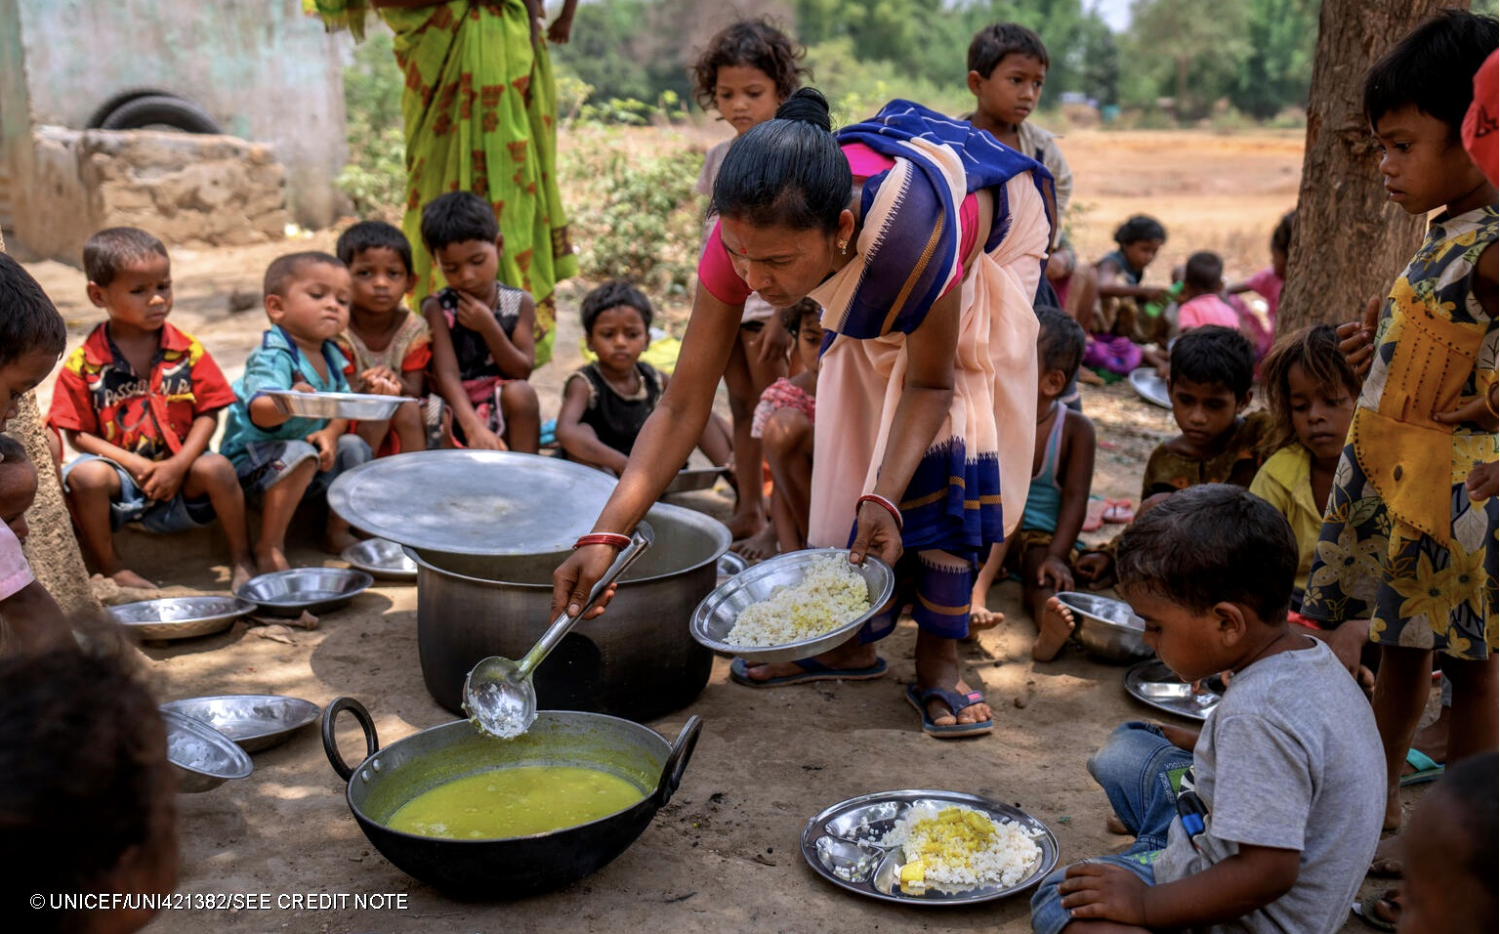 Cover image for the resource depicting an anganwadi worker serving rice & lentils to children during Village Health and Nutrition Day (VHND) in Baliadih village, West Singhbhum, Jharkhand state, India